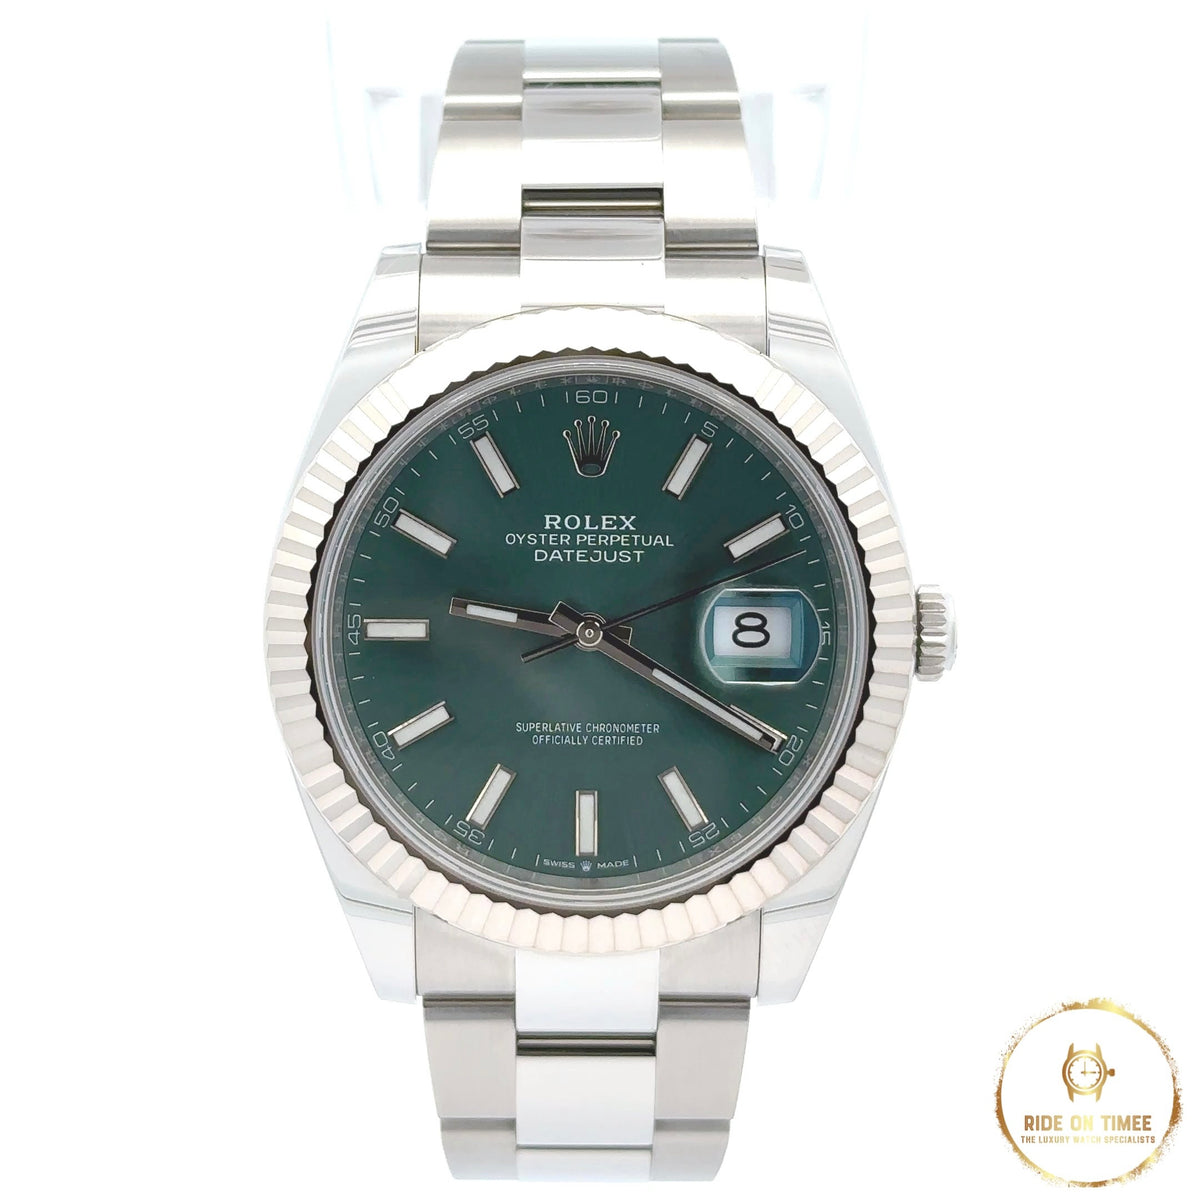 Rolex Datejust 41 Factory Mint Green Dial ‘126334’ - Ride On Timee